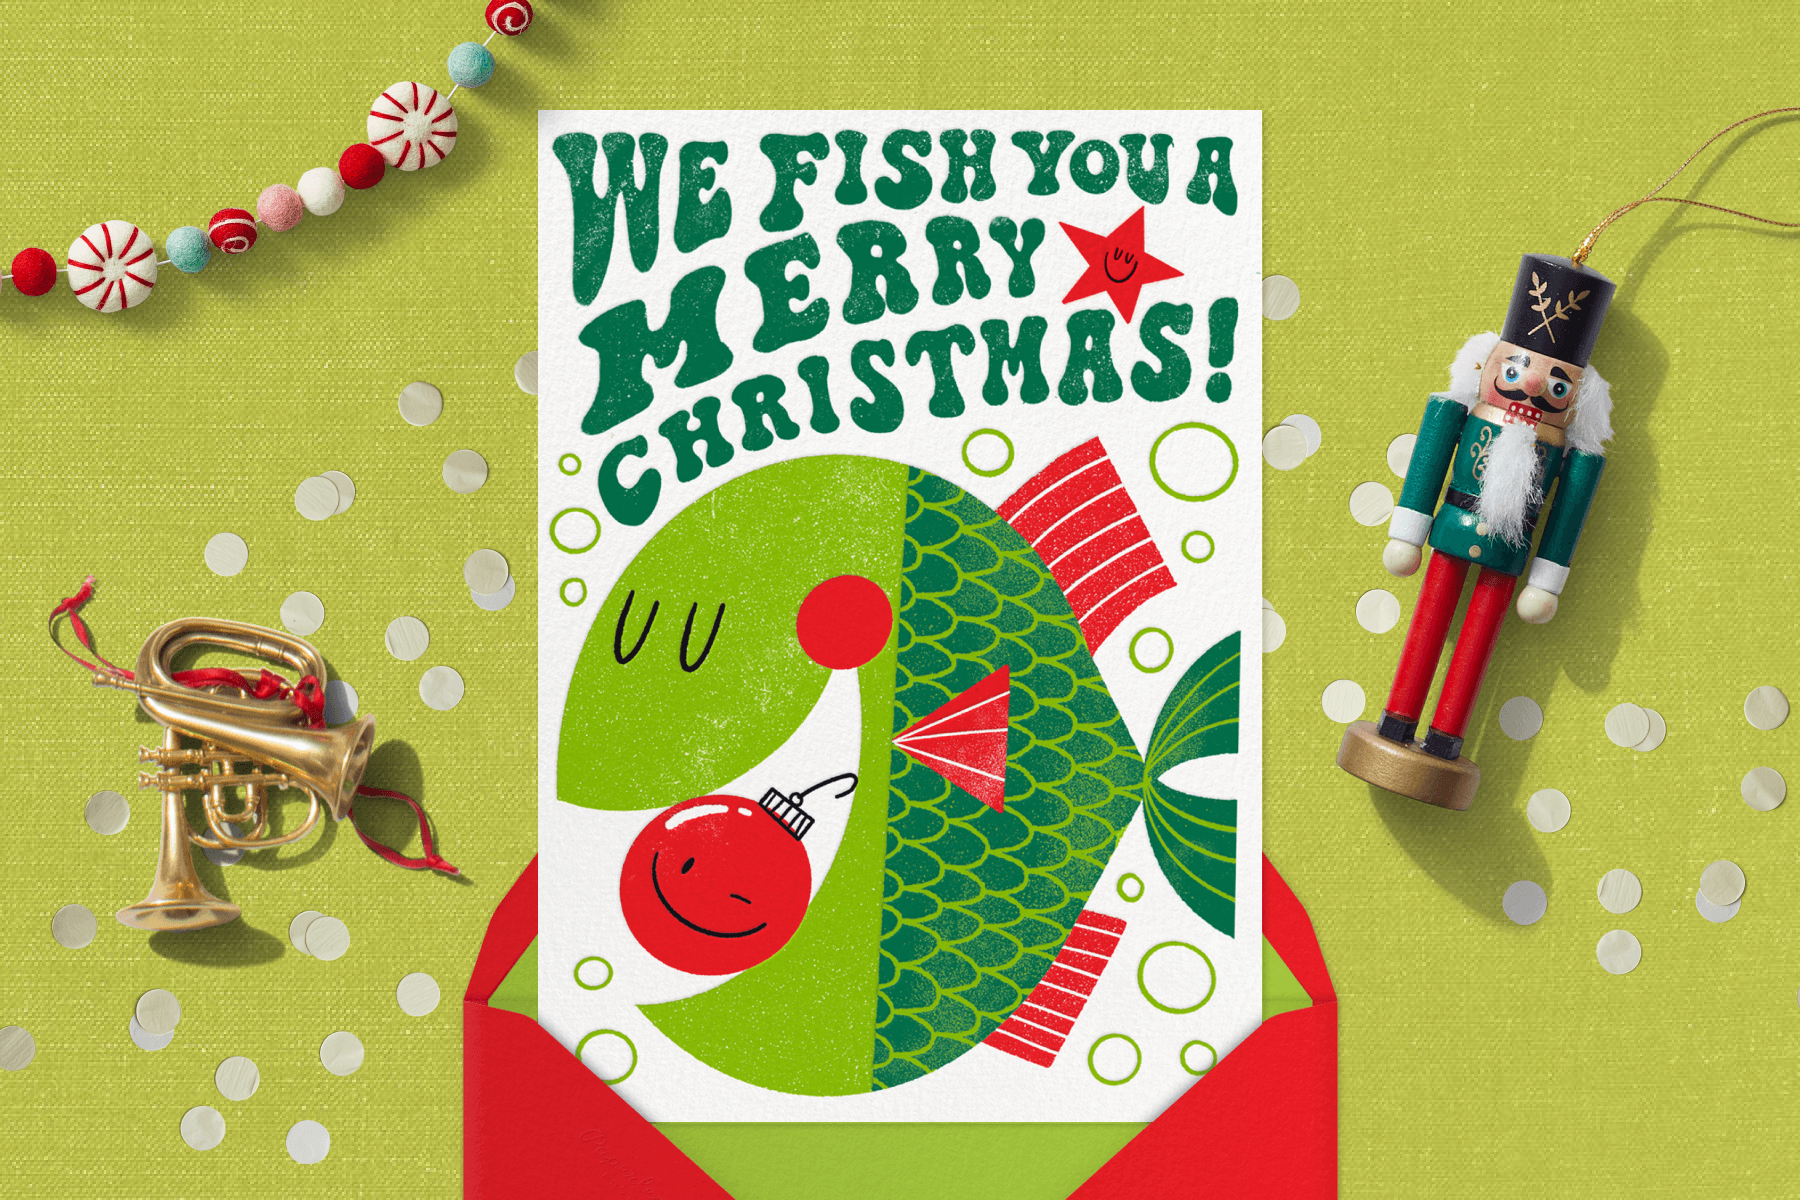 A card with a green fish swallowing a red Christmas ornament and the words “we fish you a Merry Christmas” surrounded by ornaments.